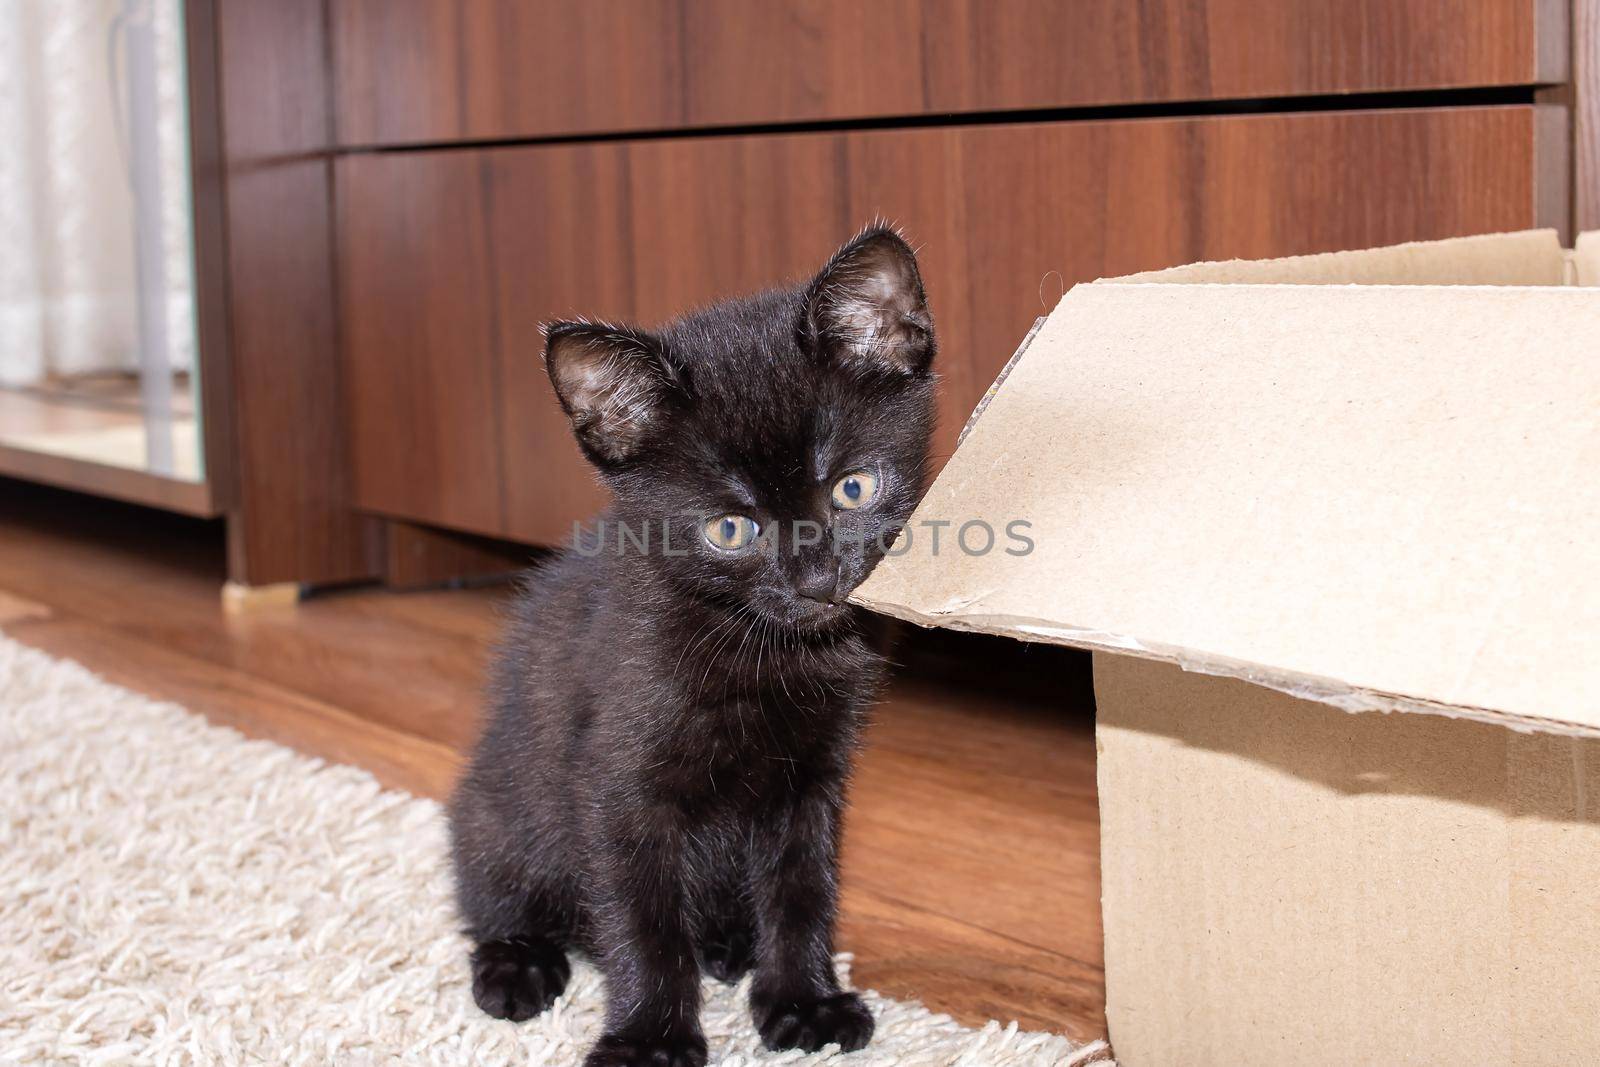 Little black kitten gnawing on a box close up